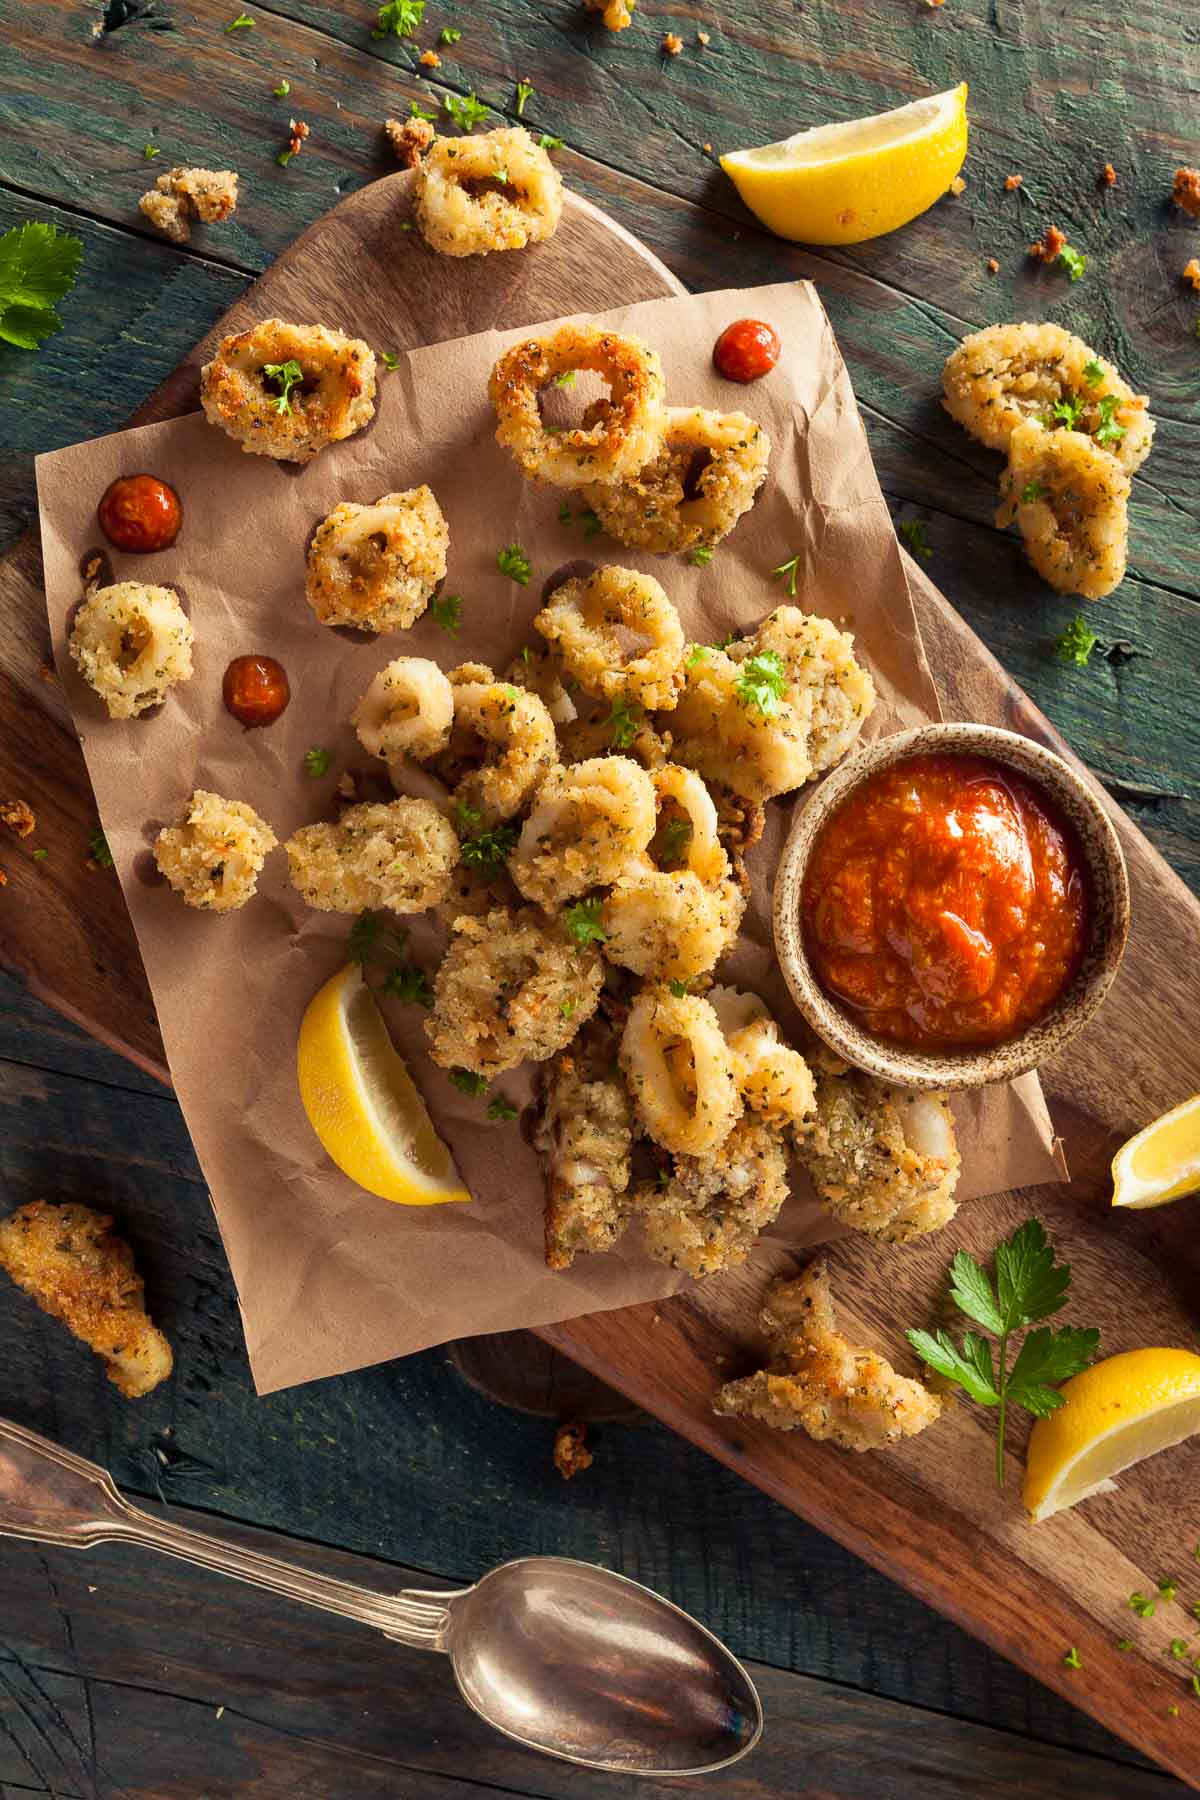 Crispy, fried calamari on parchment paper on top of a wooden board with a side of dipping sauce and lemon wedges.